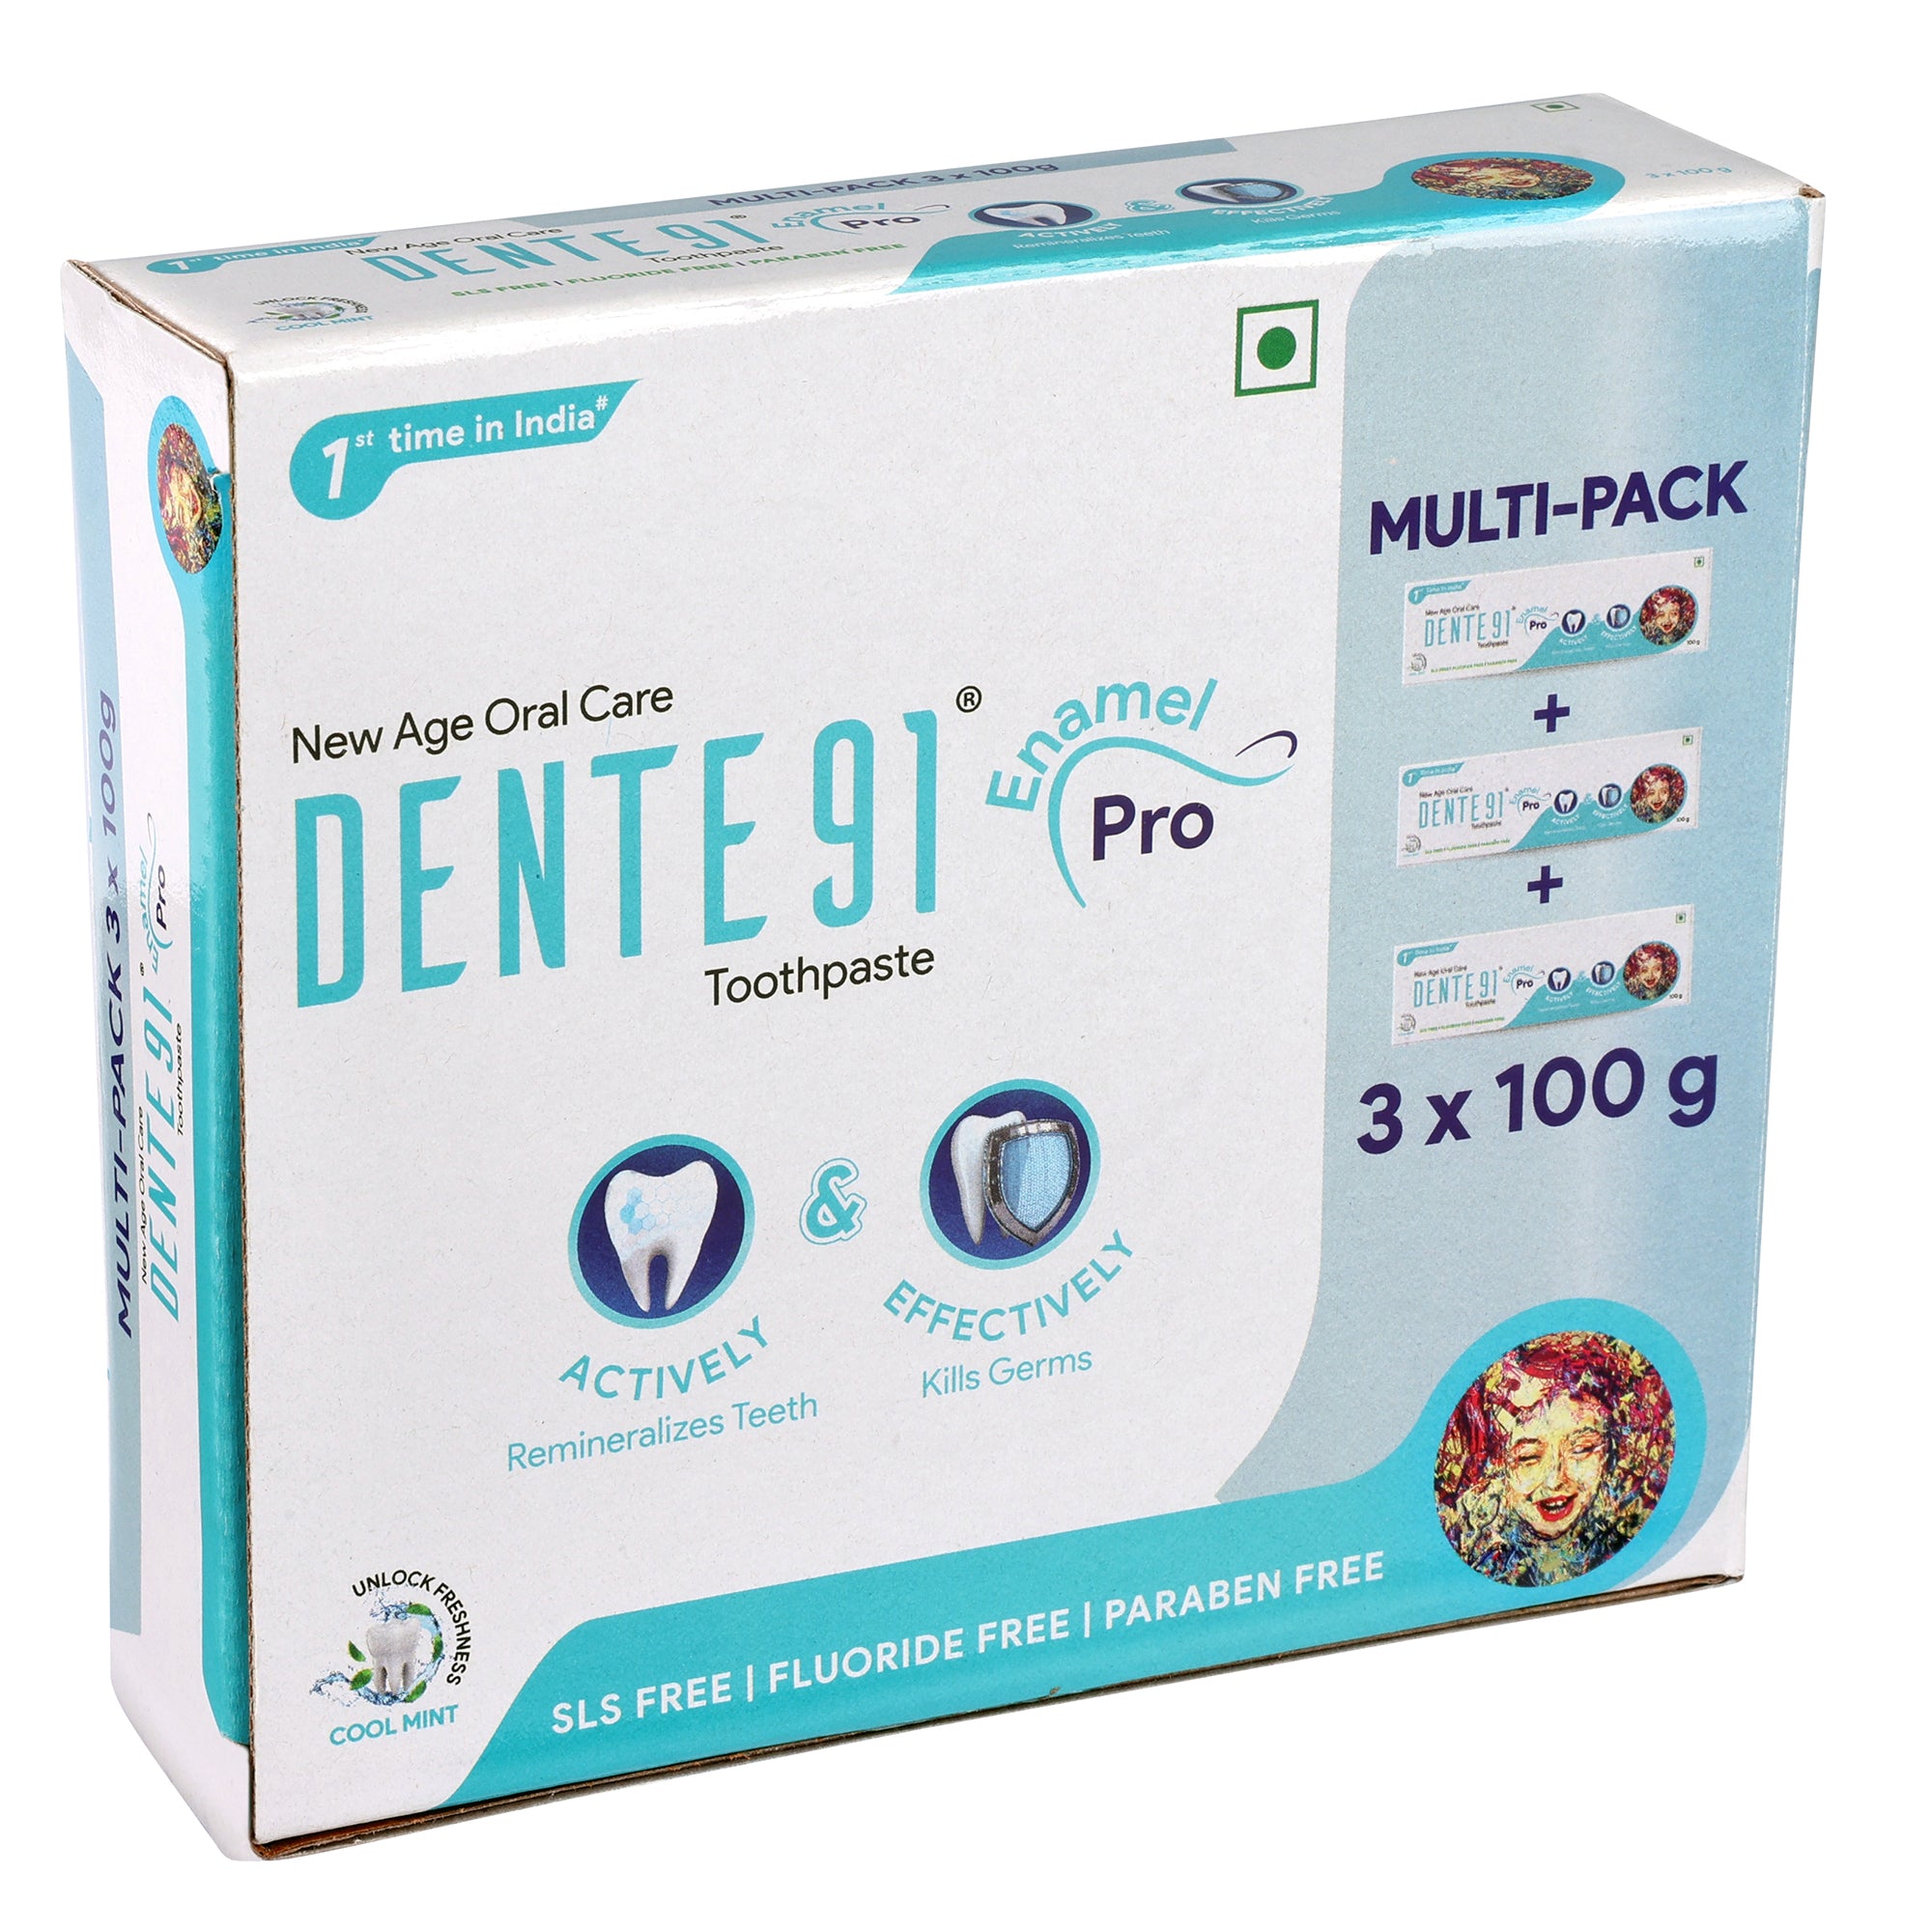 Dente91 Cool Mint Toothpaste, Strengthens Enamel, Repairs Cavities, Remineralizes Teeth , Sensitivity Relief, SLS Free, Fluoride Free, Paraben Free, Pack of 3, 300g